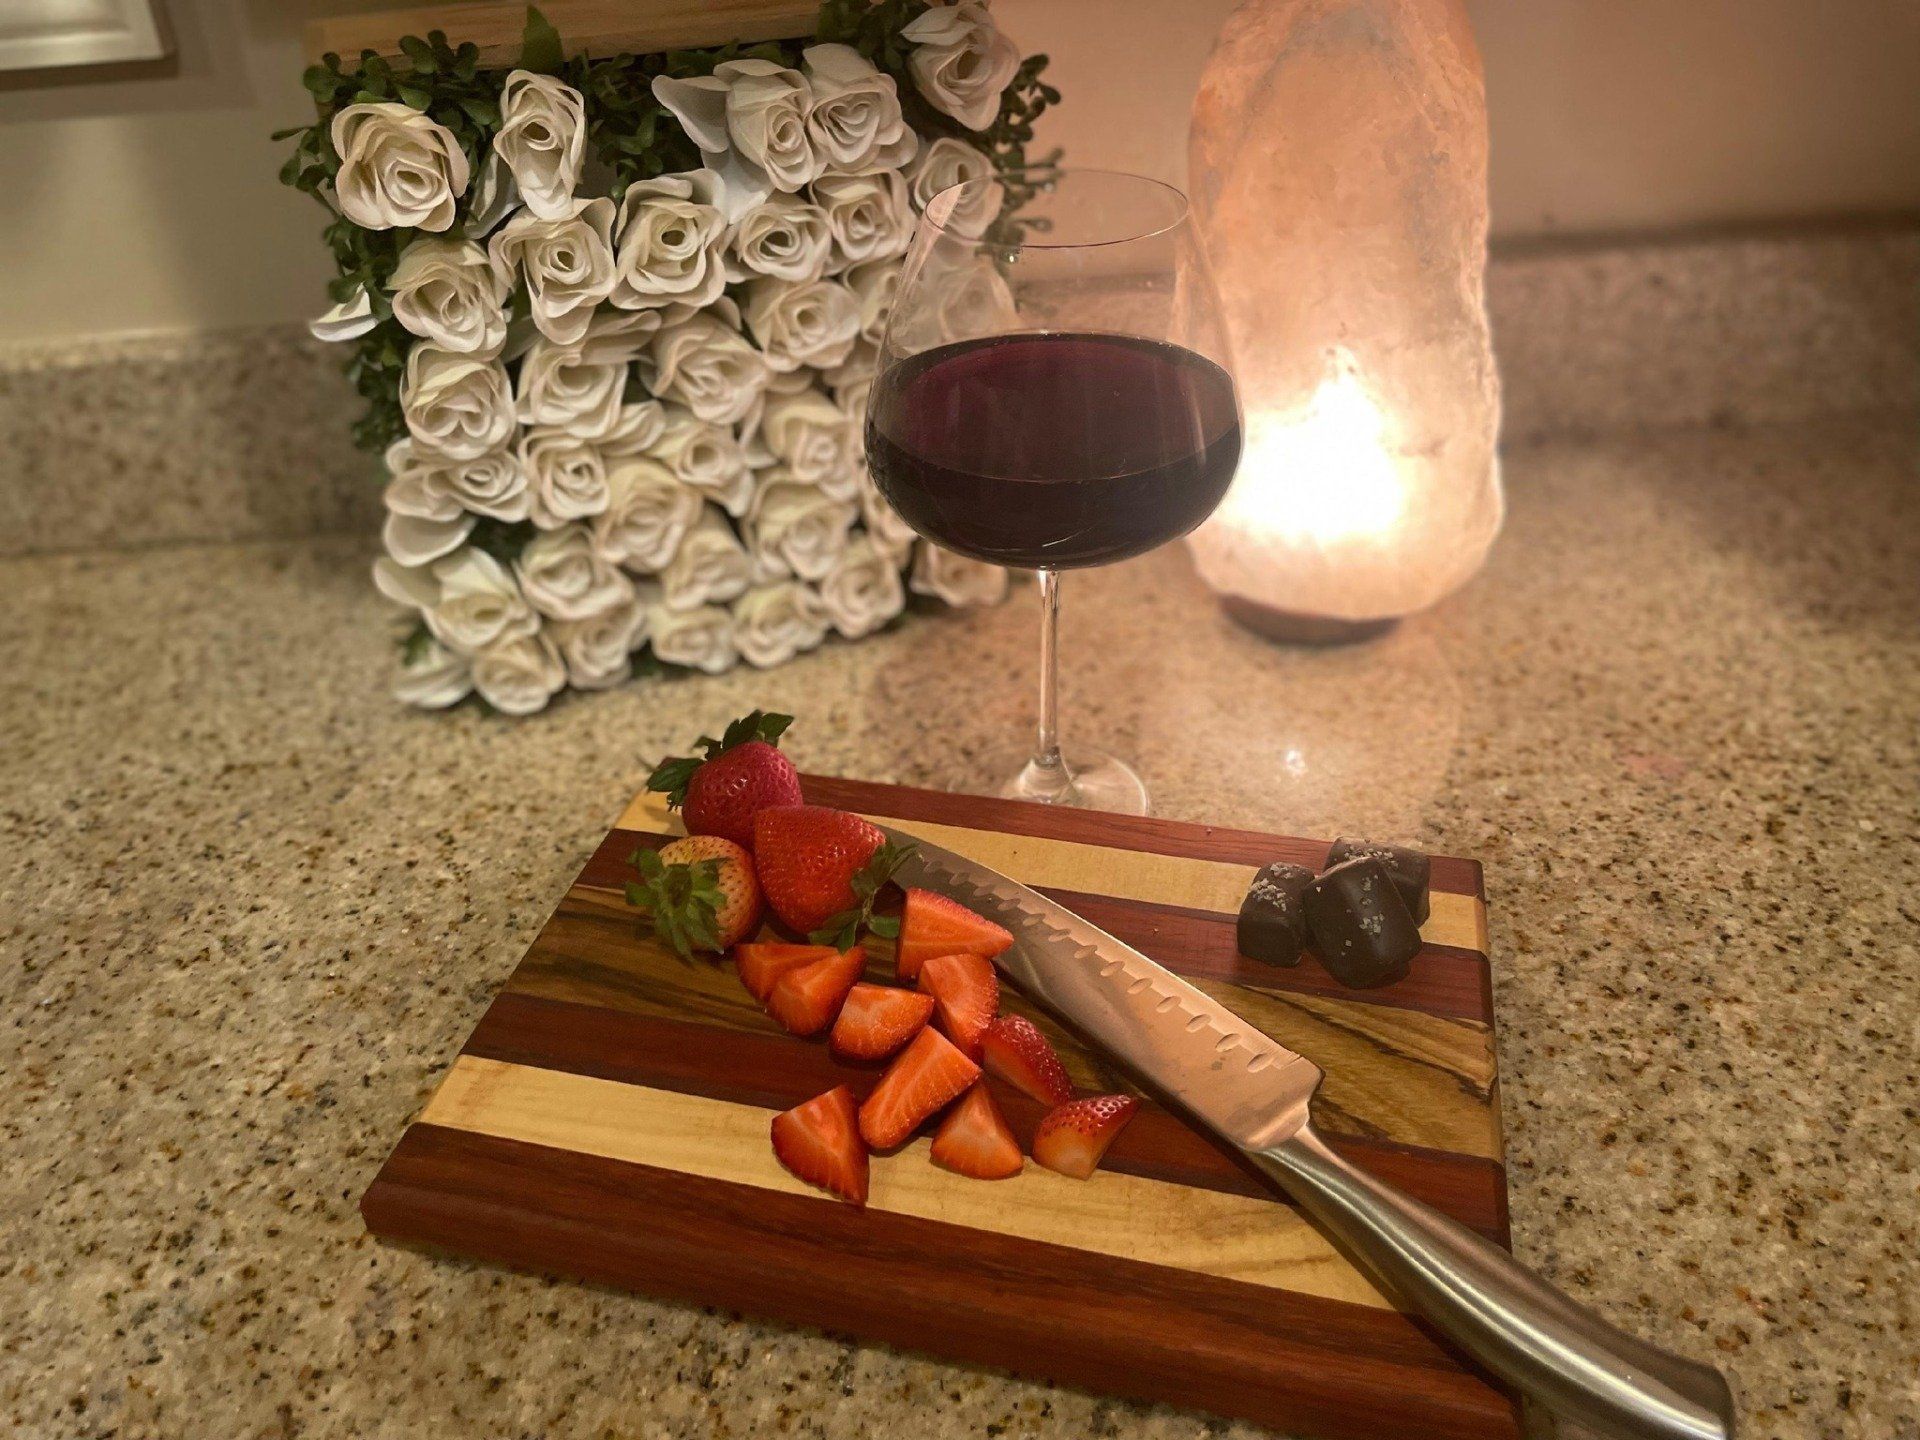 Knife and Strawberries on Cutting Board